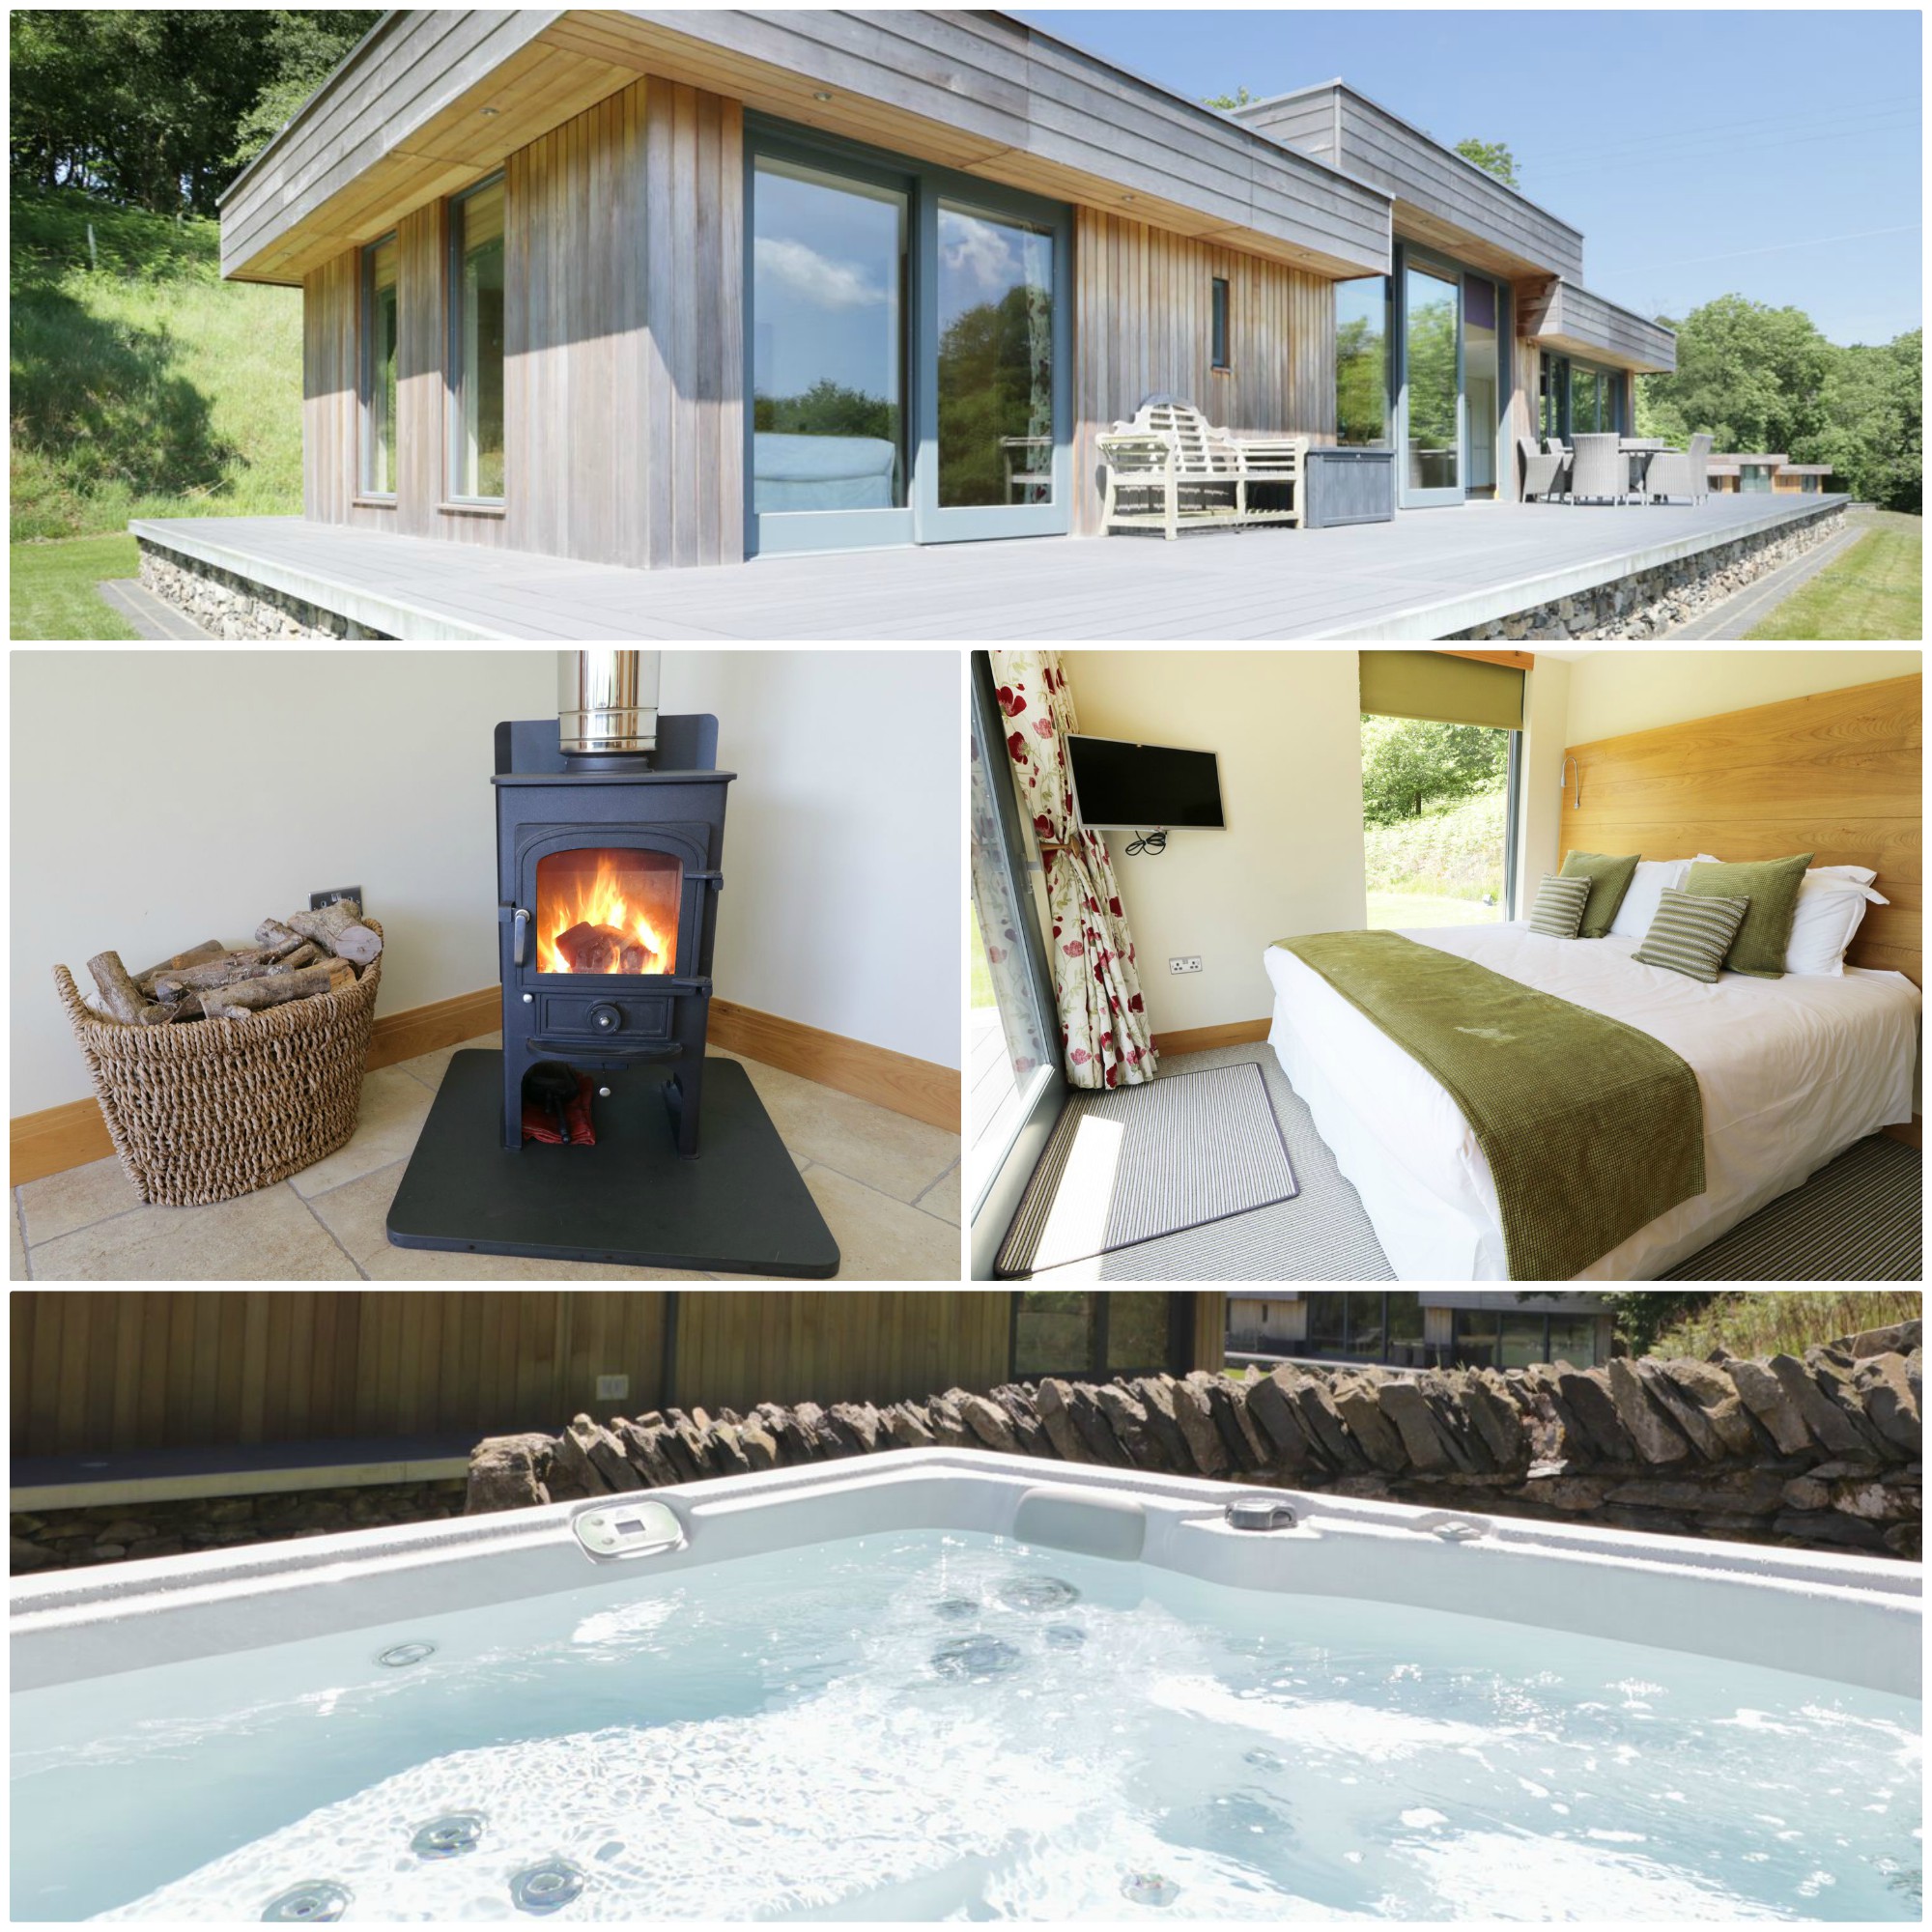 5* luxury for 6 in the Lake District with a hot tub and wood-burning stove